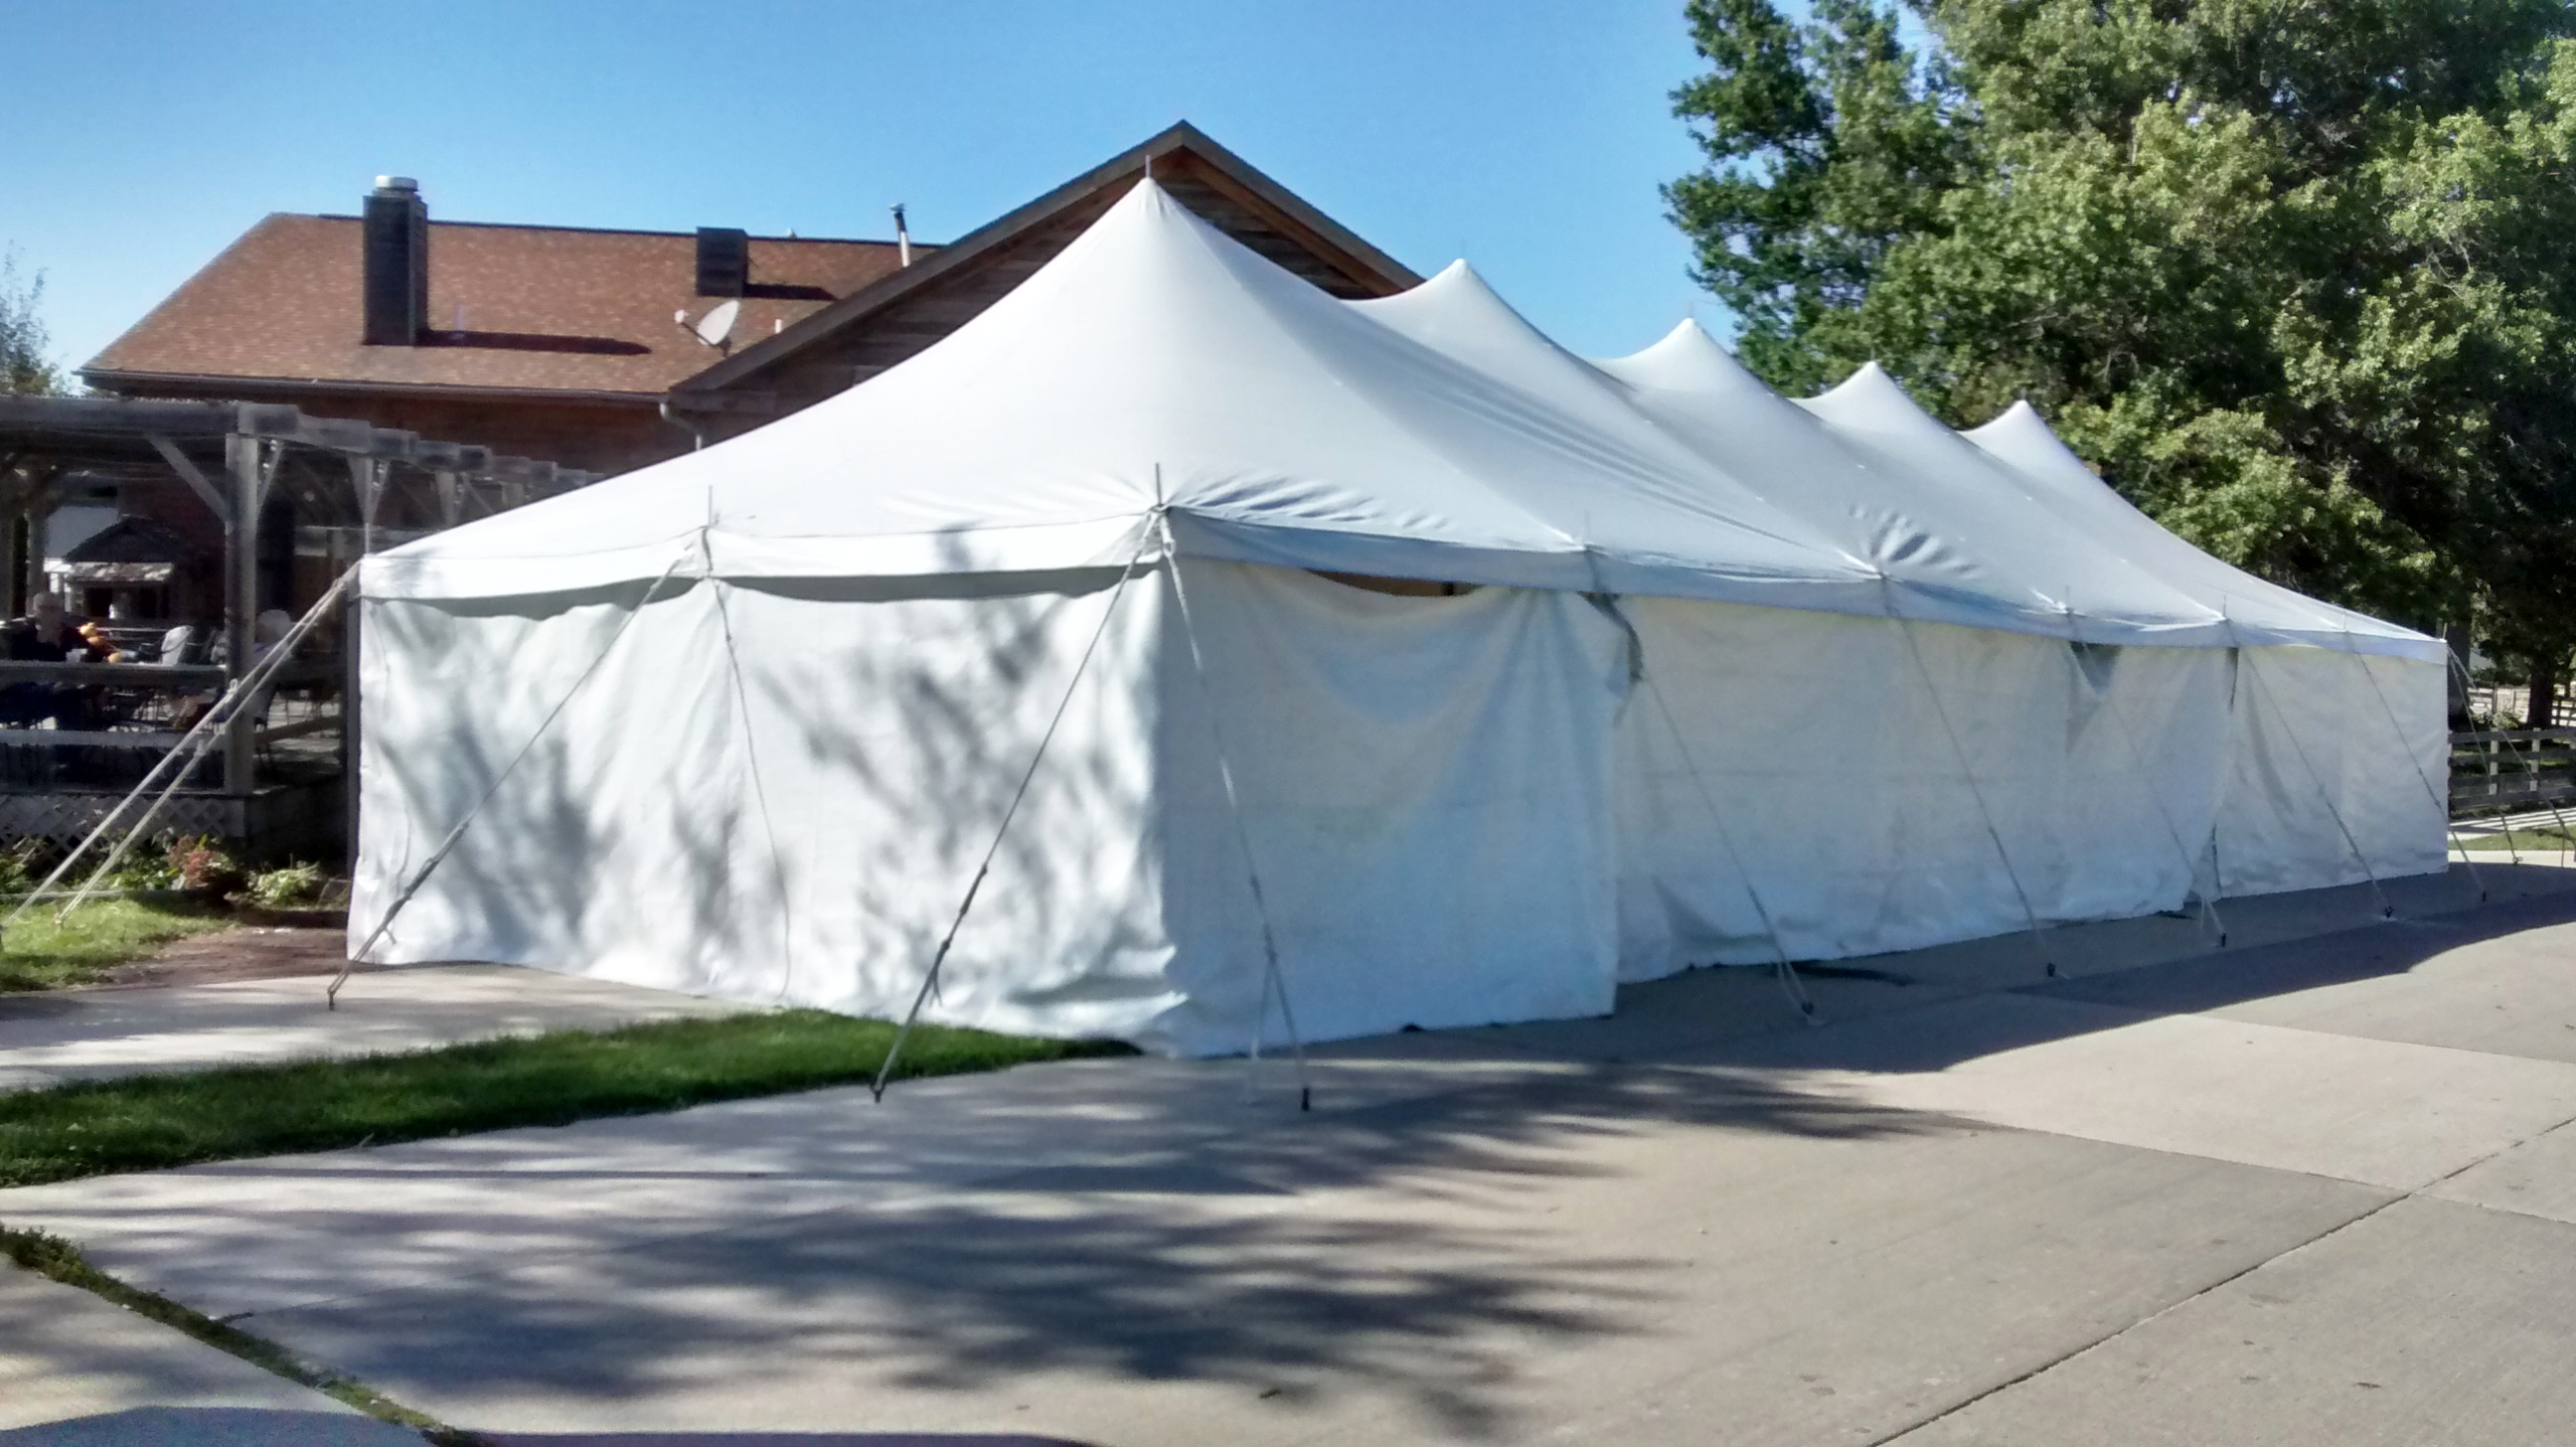 20' x 60' rope and pole tent with sidewall at Millstream Brewing Company in Amana, IA